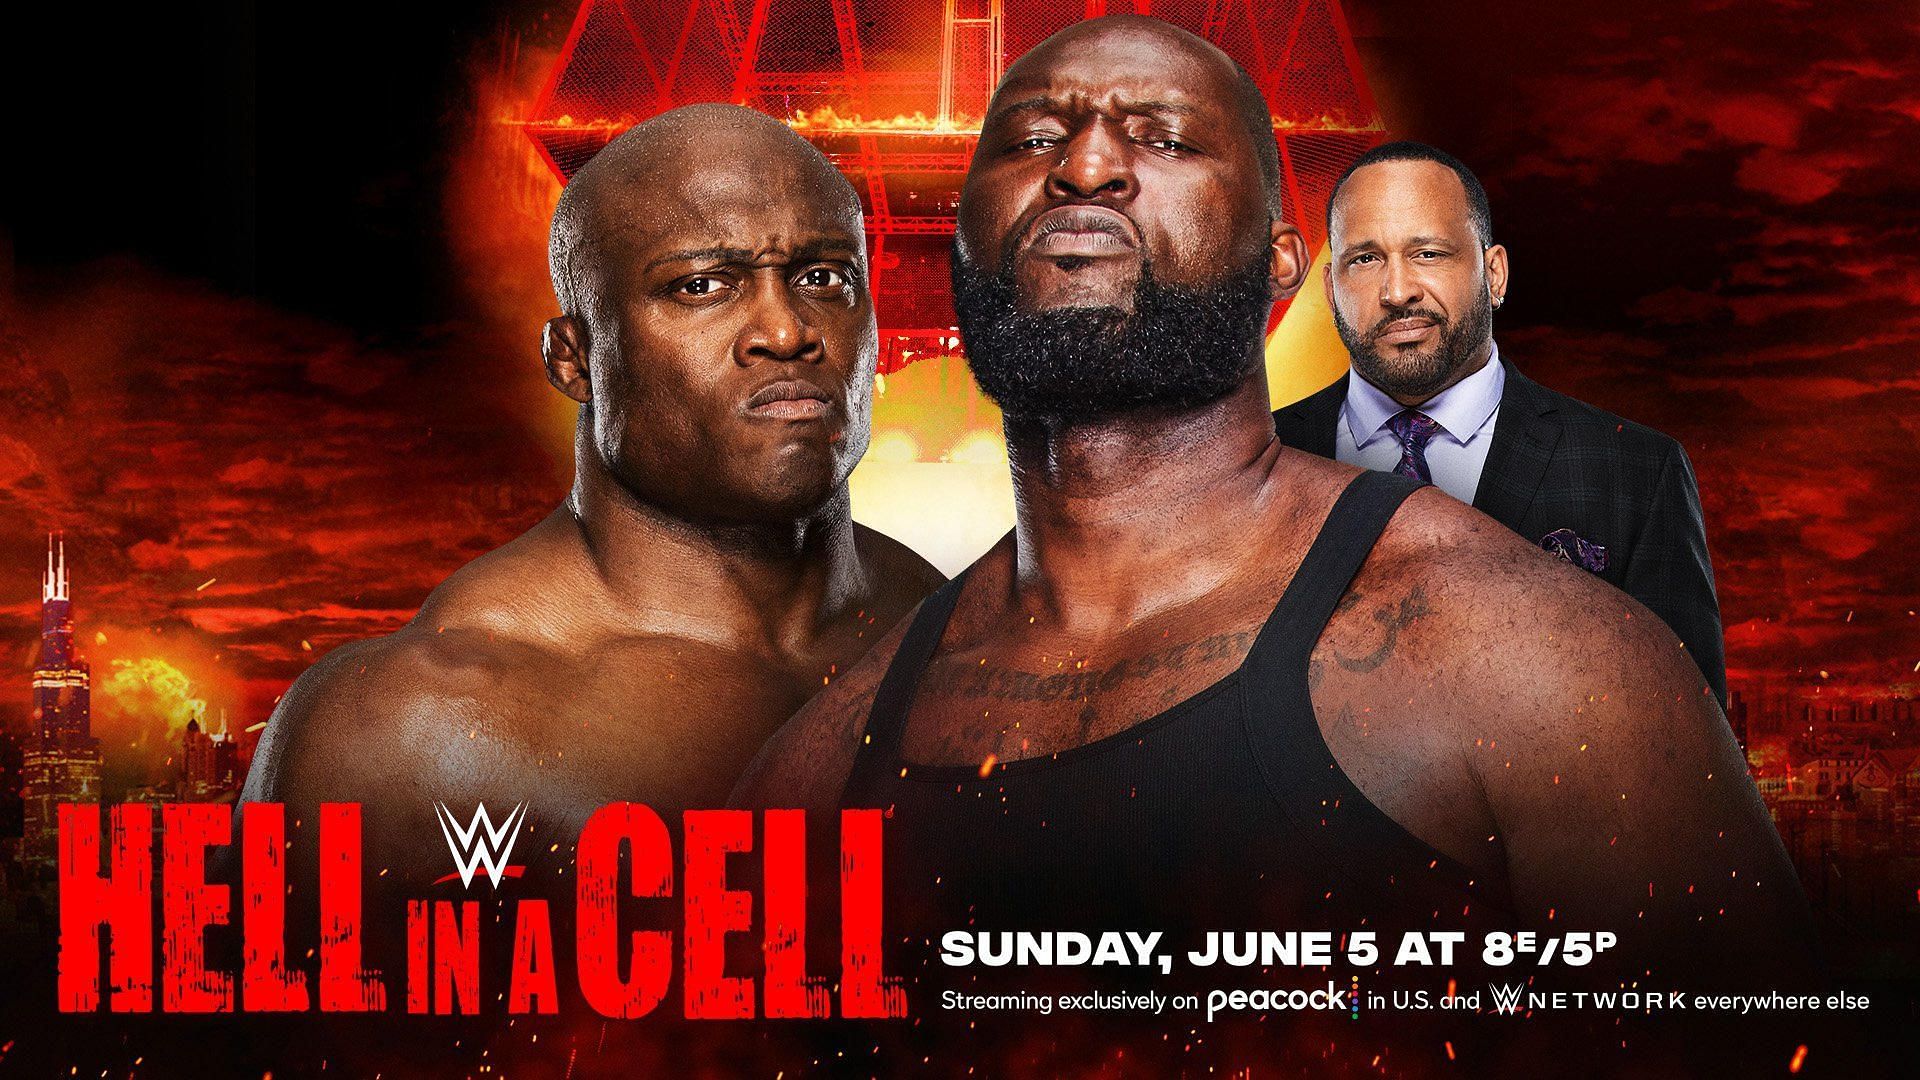 Will Bobby Lashley overcome the odds?